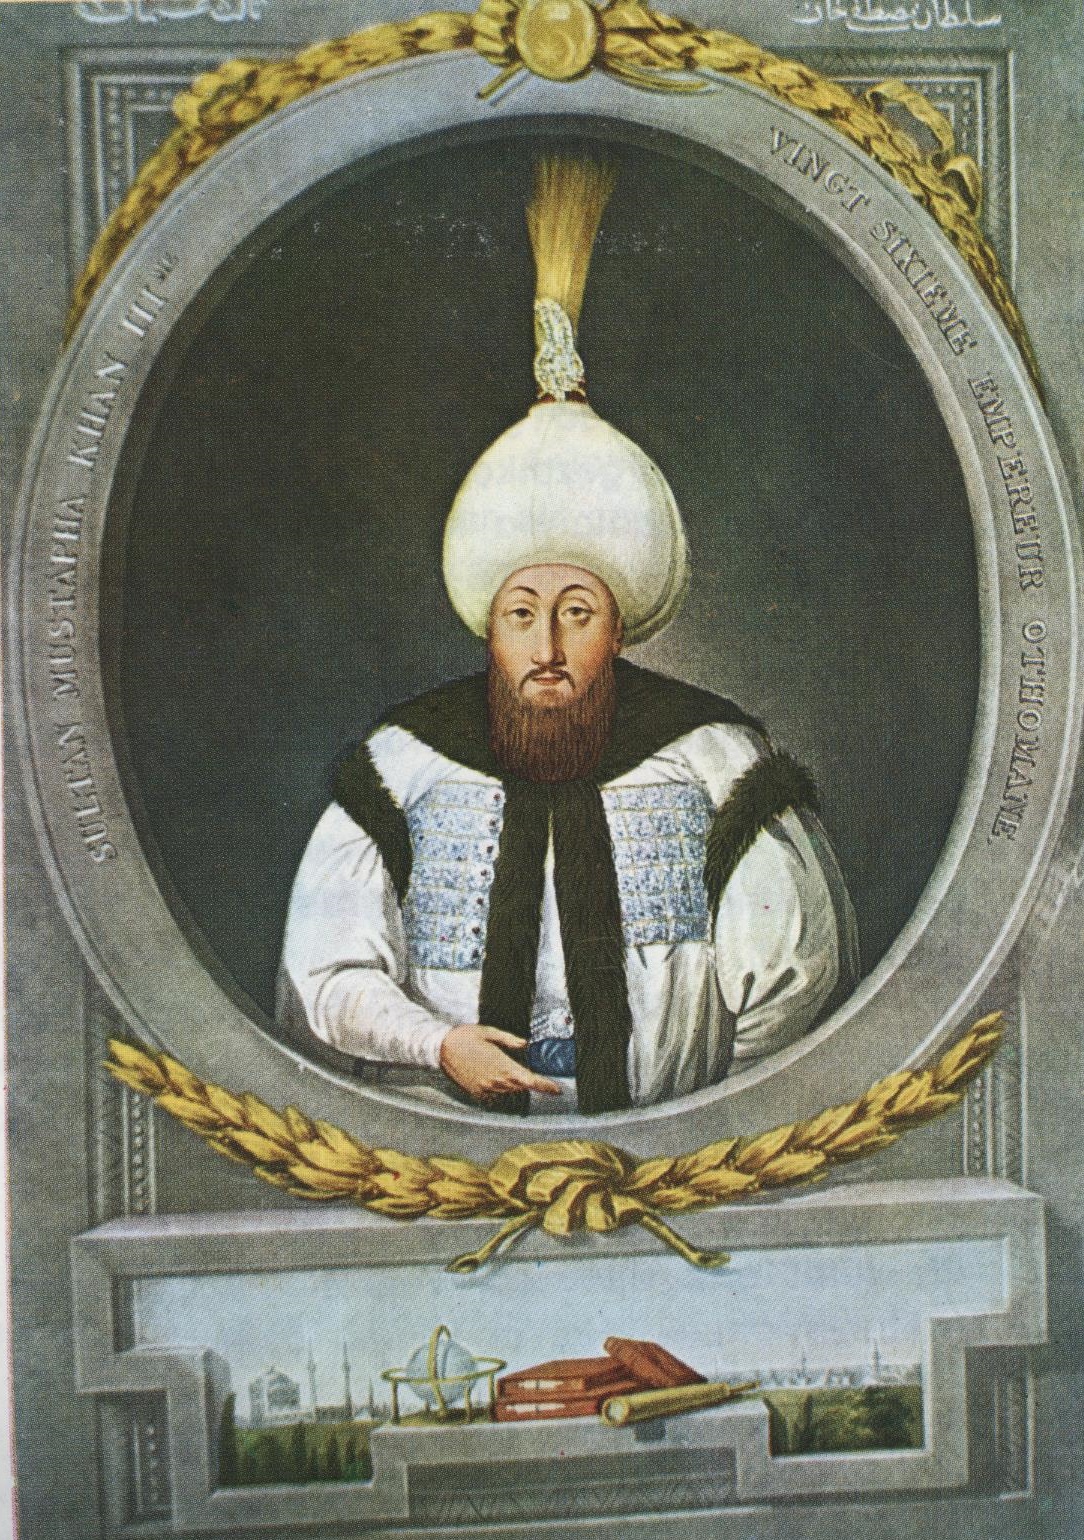 1774: Ottoman Sultan whose Mother and Wife were probably Catholic